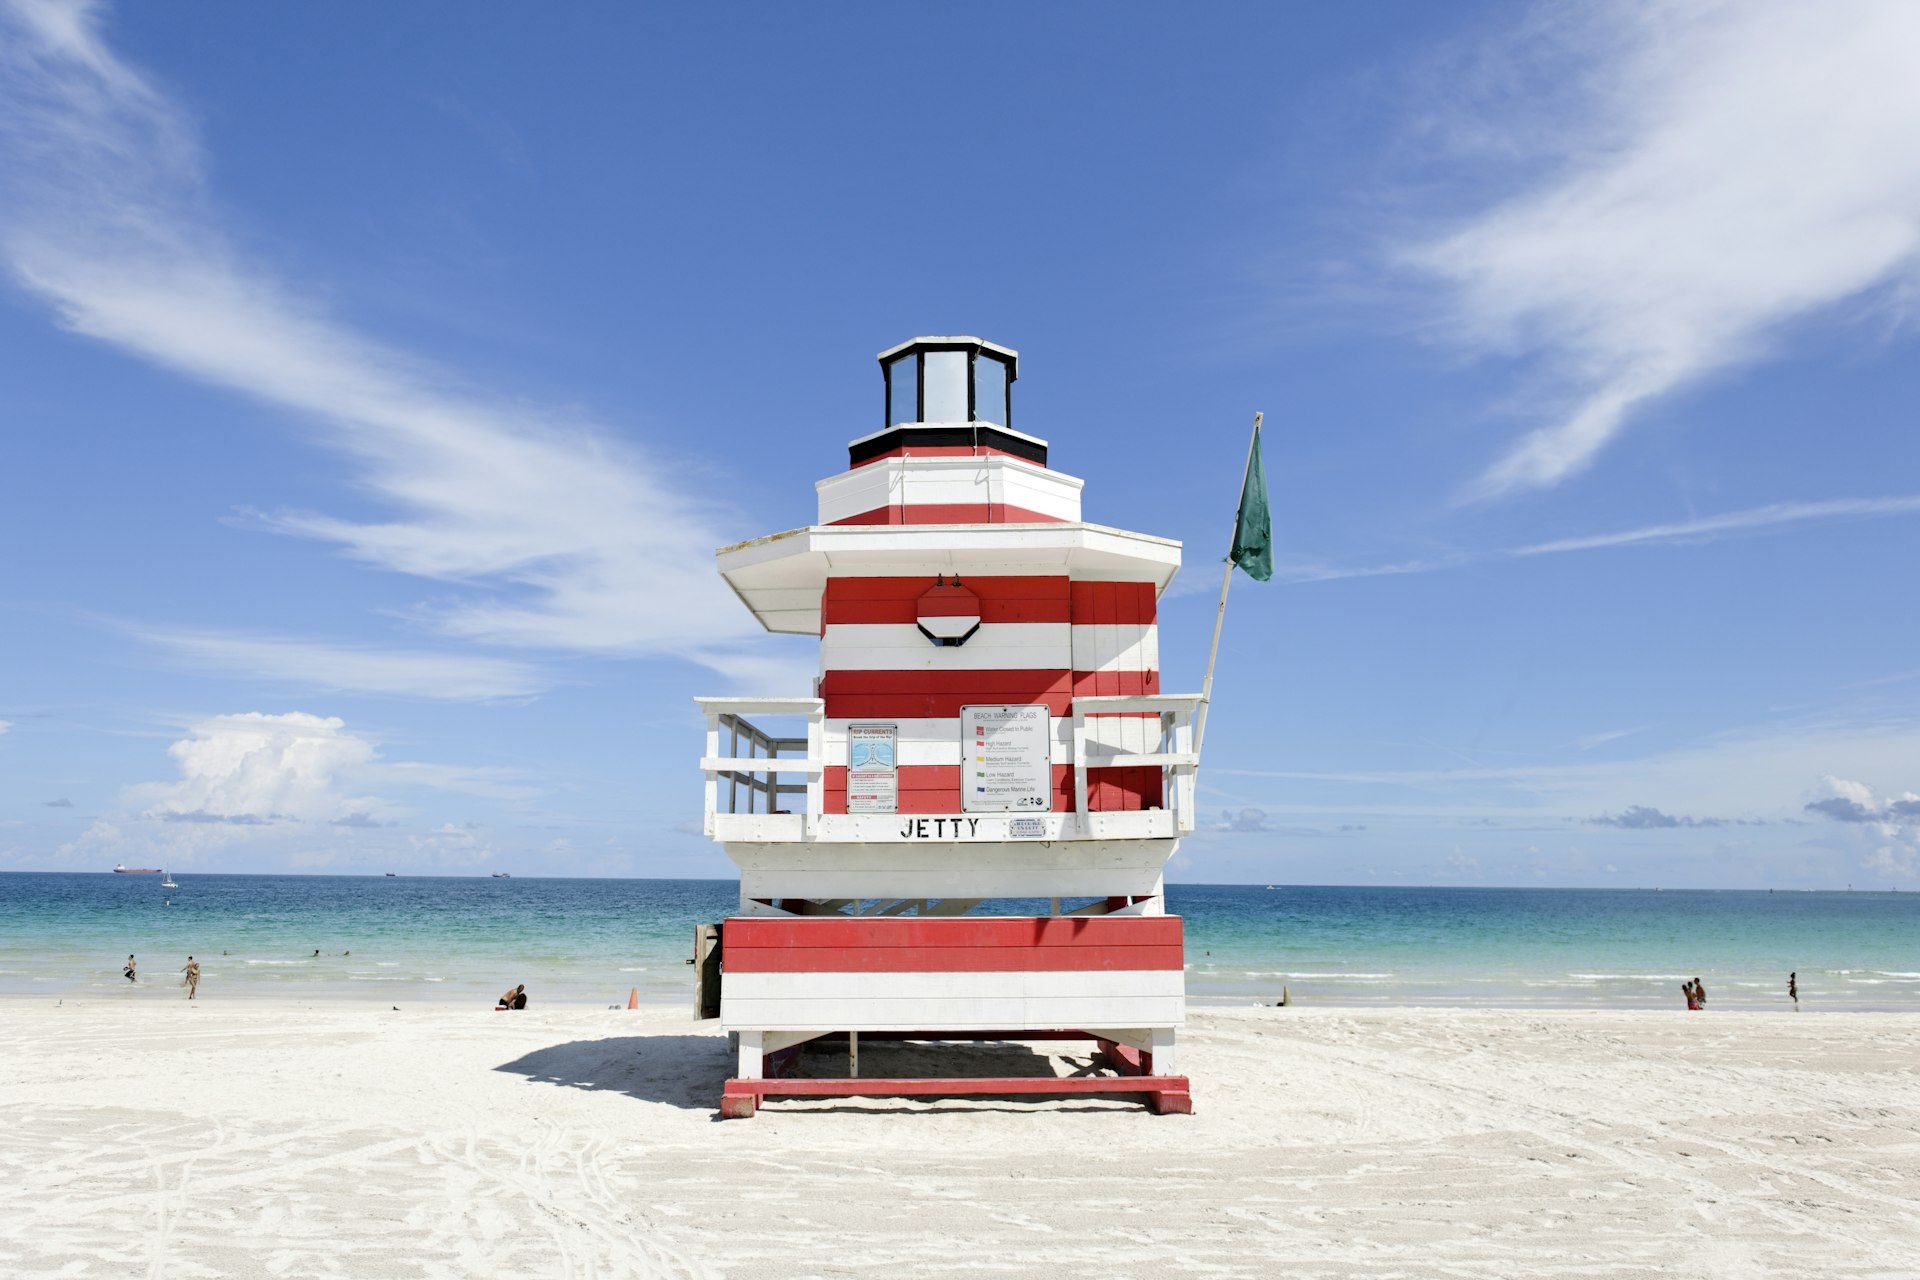 A large red-and-white-striped lifeguard tower standing on a white-sand beach and set against a blue sky with wispy clouds